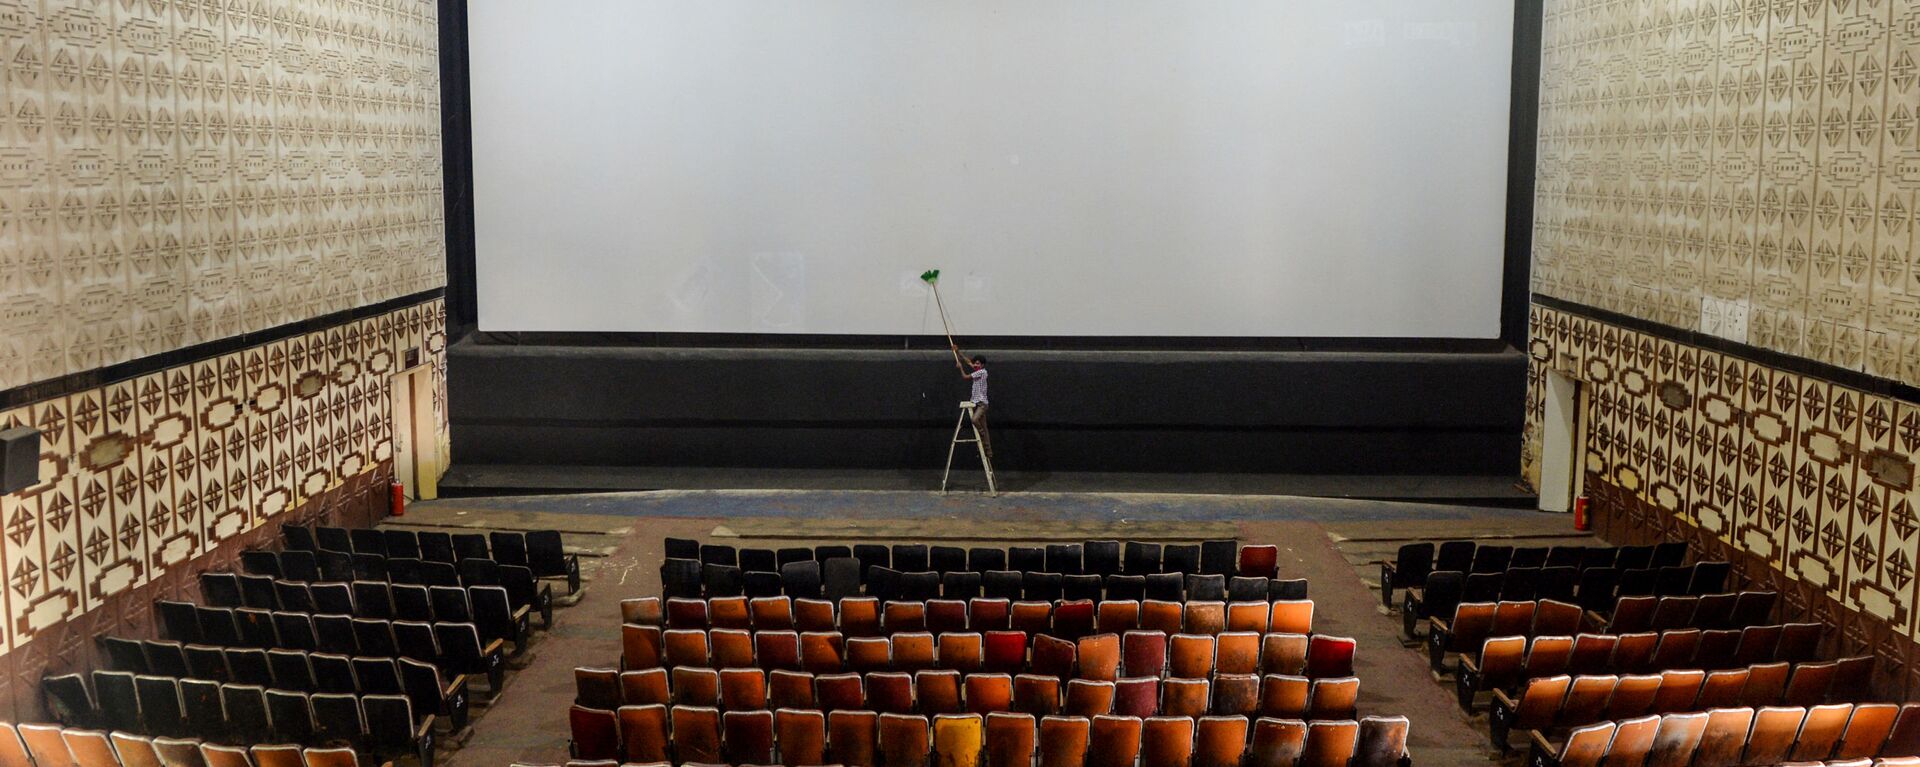 A worker cleans the screen of a cinema hall as part of preparations for a possible reopening after the government eased the lockdown restrictions previously imposed due to the Covid-19 coronavirus, in Chennai on October 8, 2020 - Sputnik International, 1920, 29.08.2021